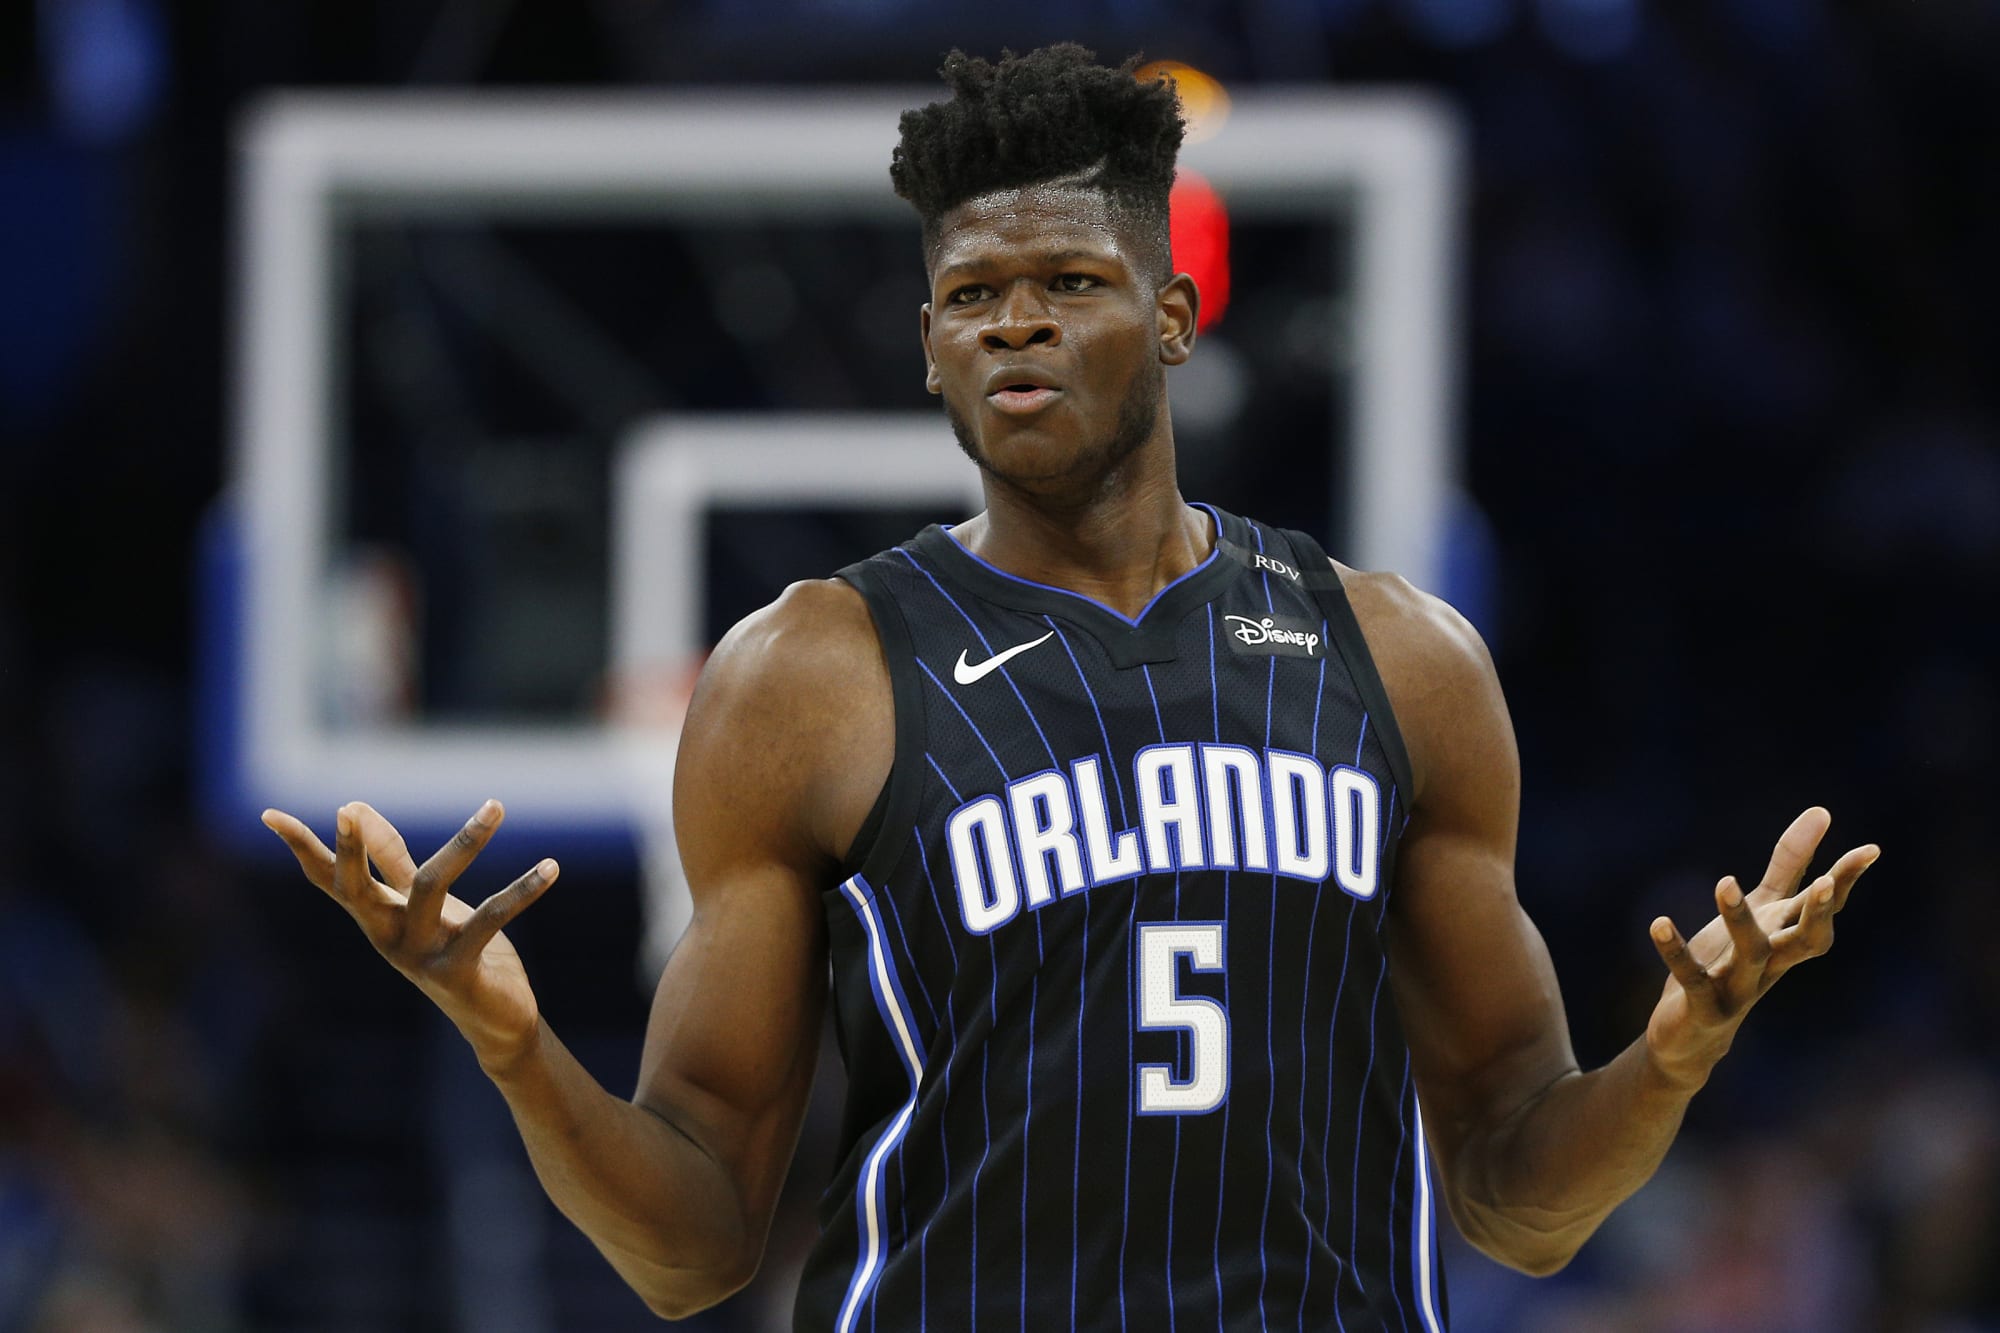 Orlando Magic's injury caution has context with youth basketball worries